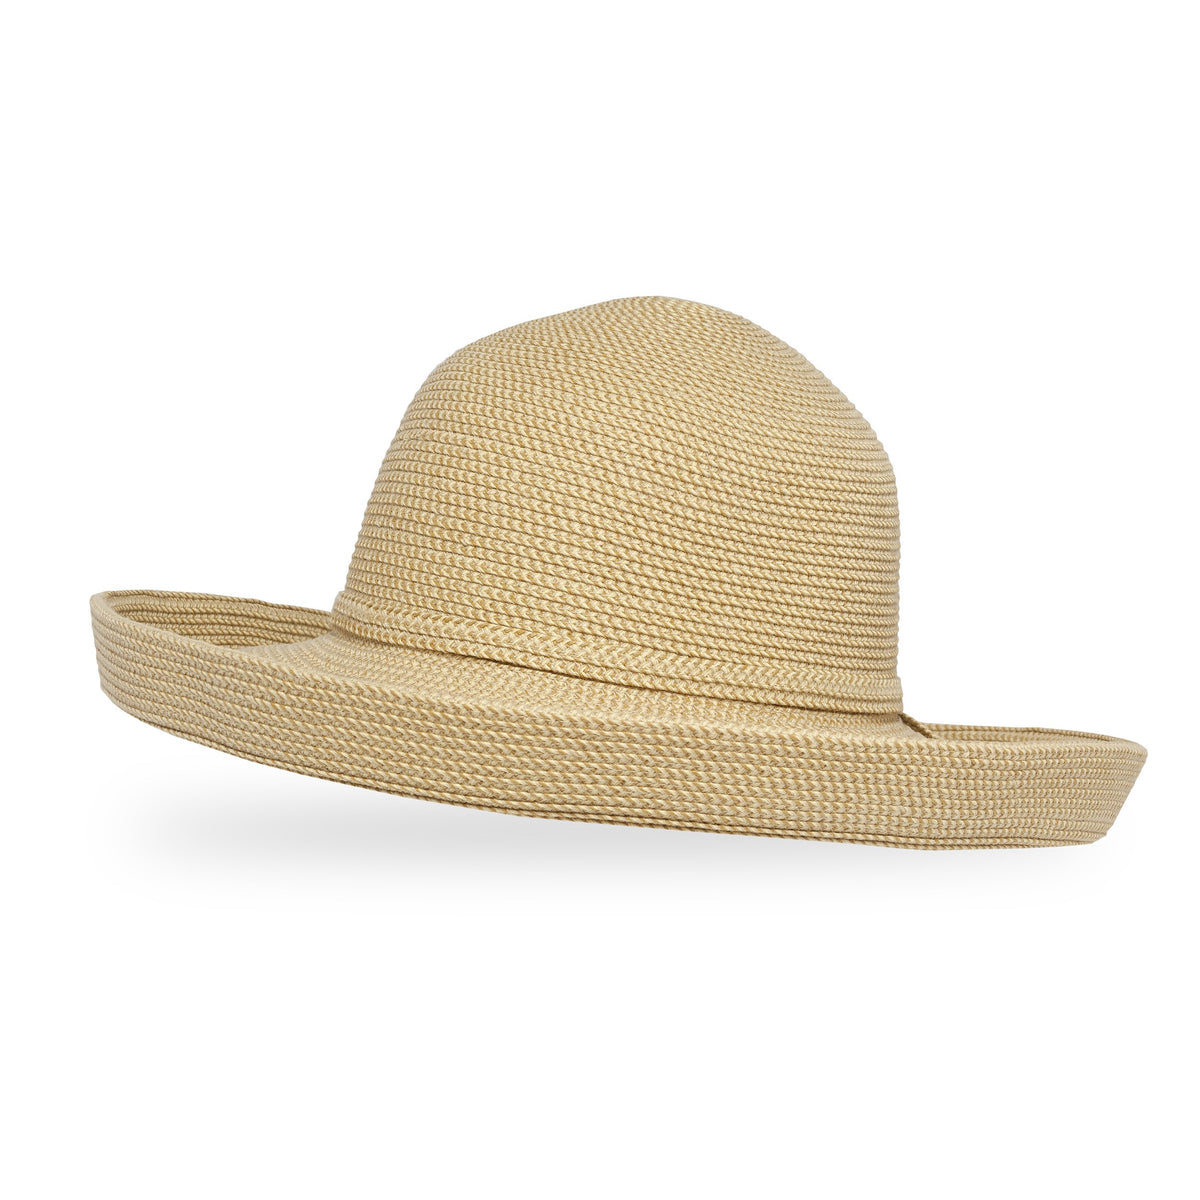 August Hats Colorblock Fedora, Natural/Navy, One Size